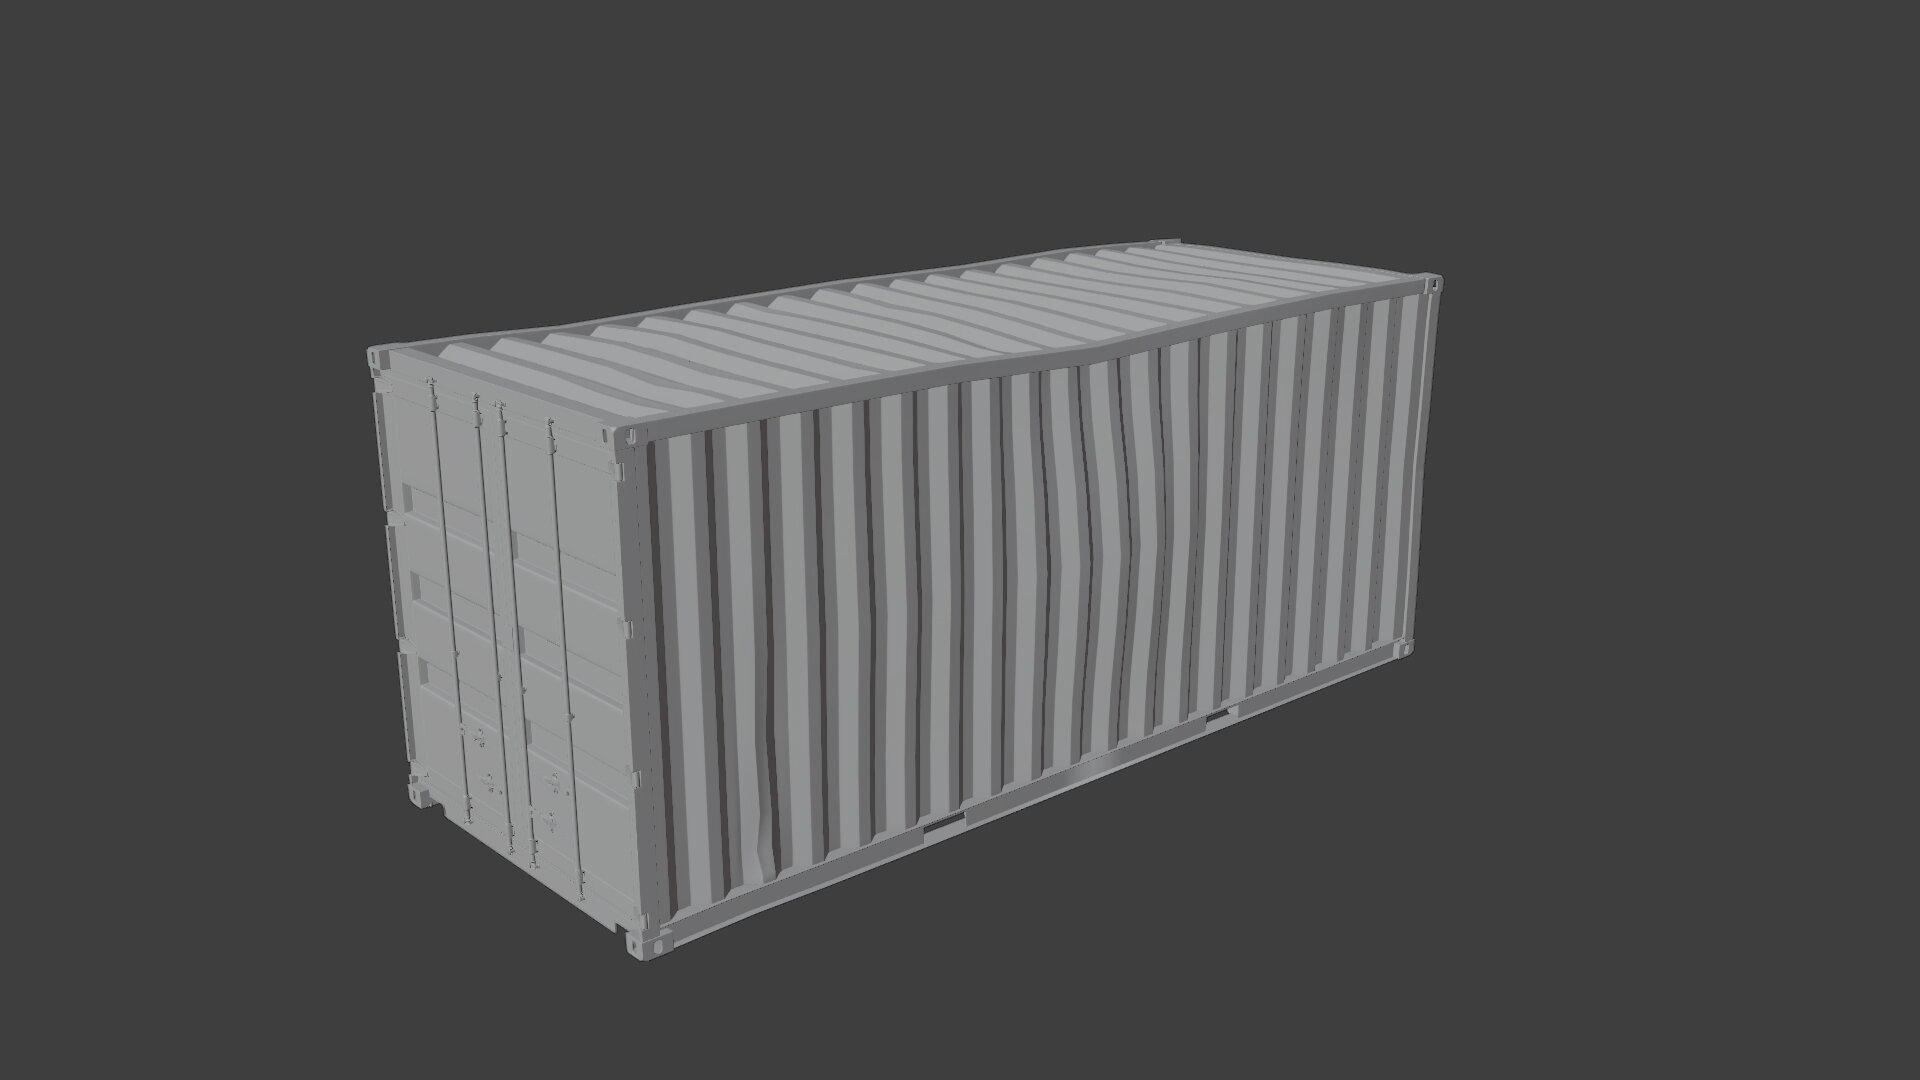 shippingcontainer.jpg